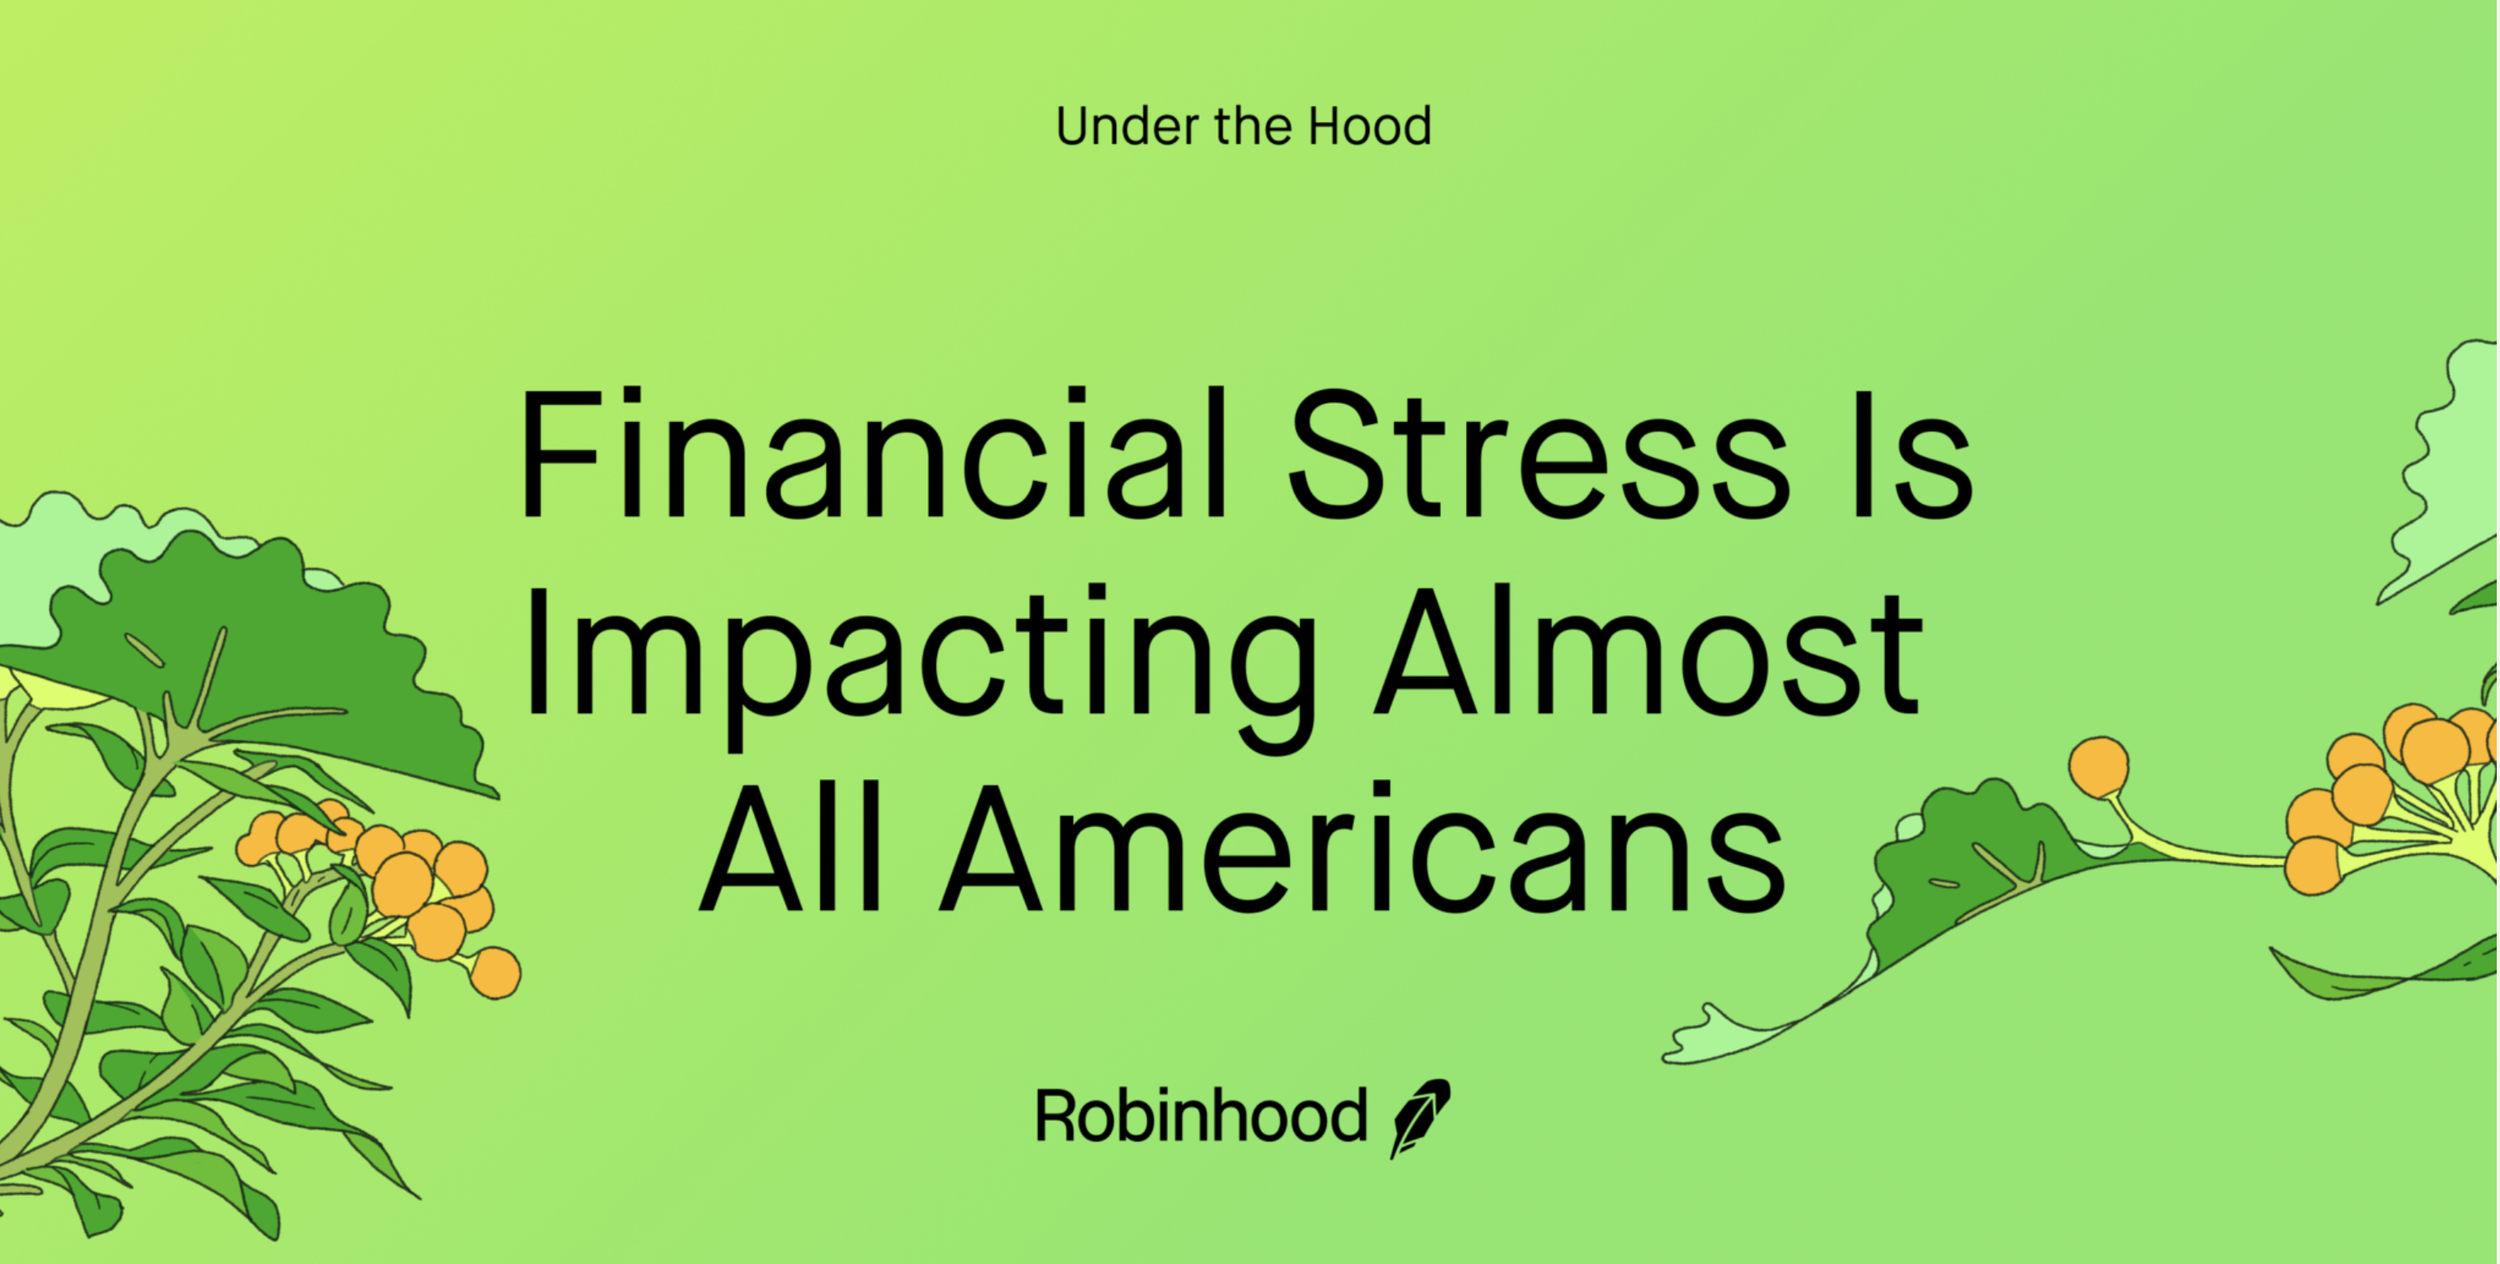 Robinhood Financial Wellness Study Finds that 84% of Americans are Stressed About Money, but Over Half Are Still Spending on What Makes Them Happy